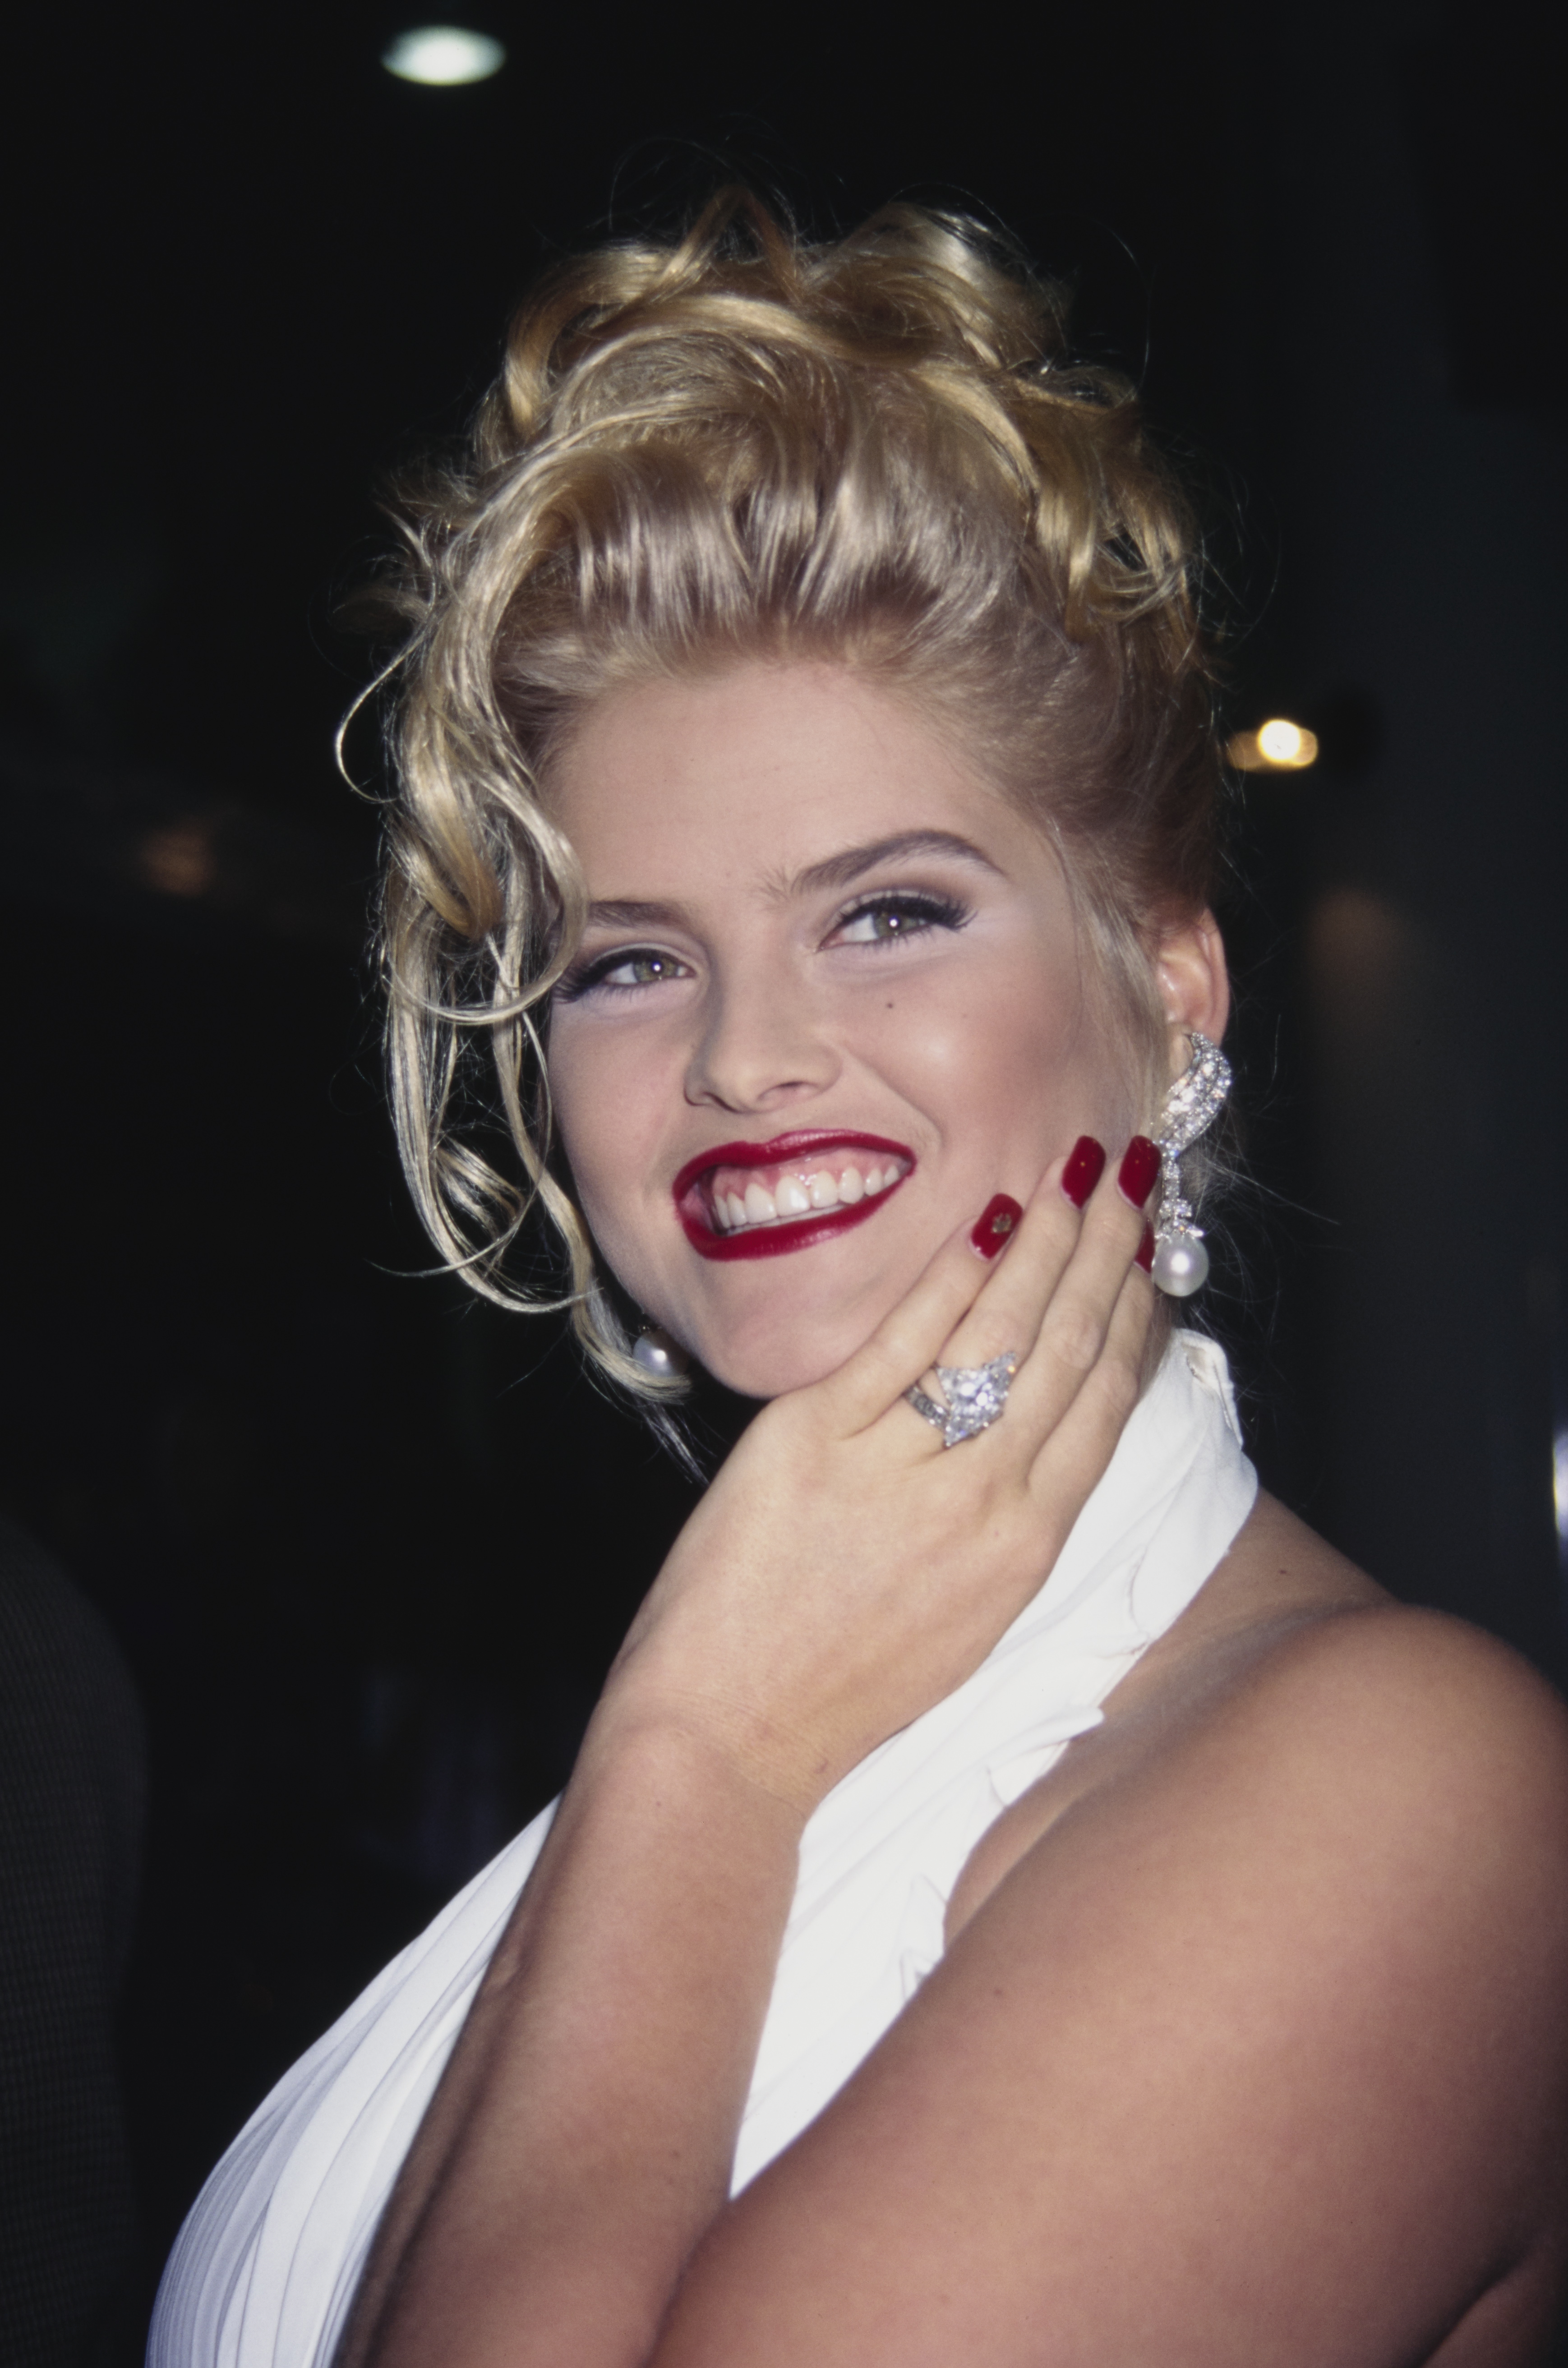 Anna Nicole Smith at the opening of Planet Hollywood in Las Vegas, Nevada on July 24, 1994 | Source: Getty Images